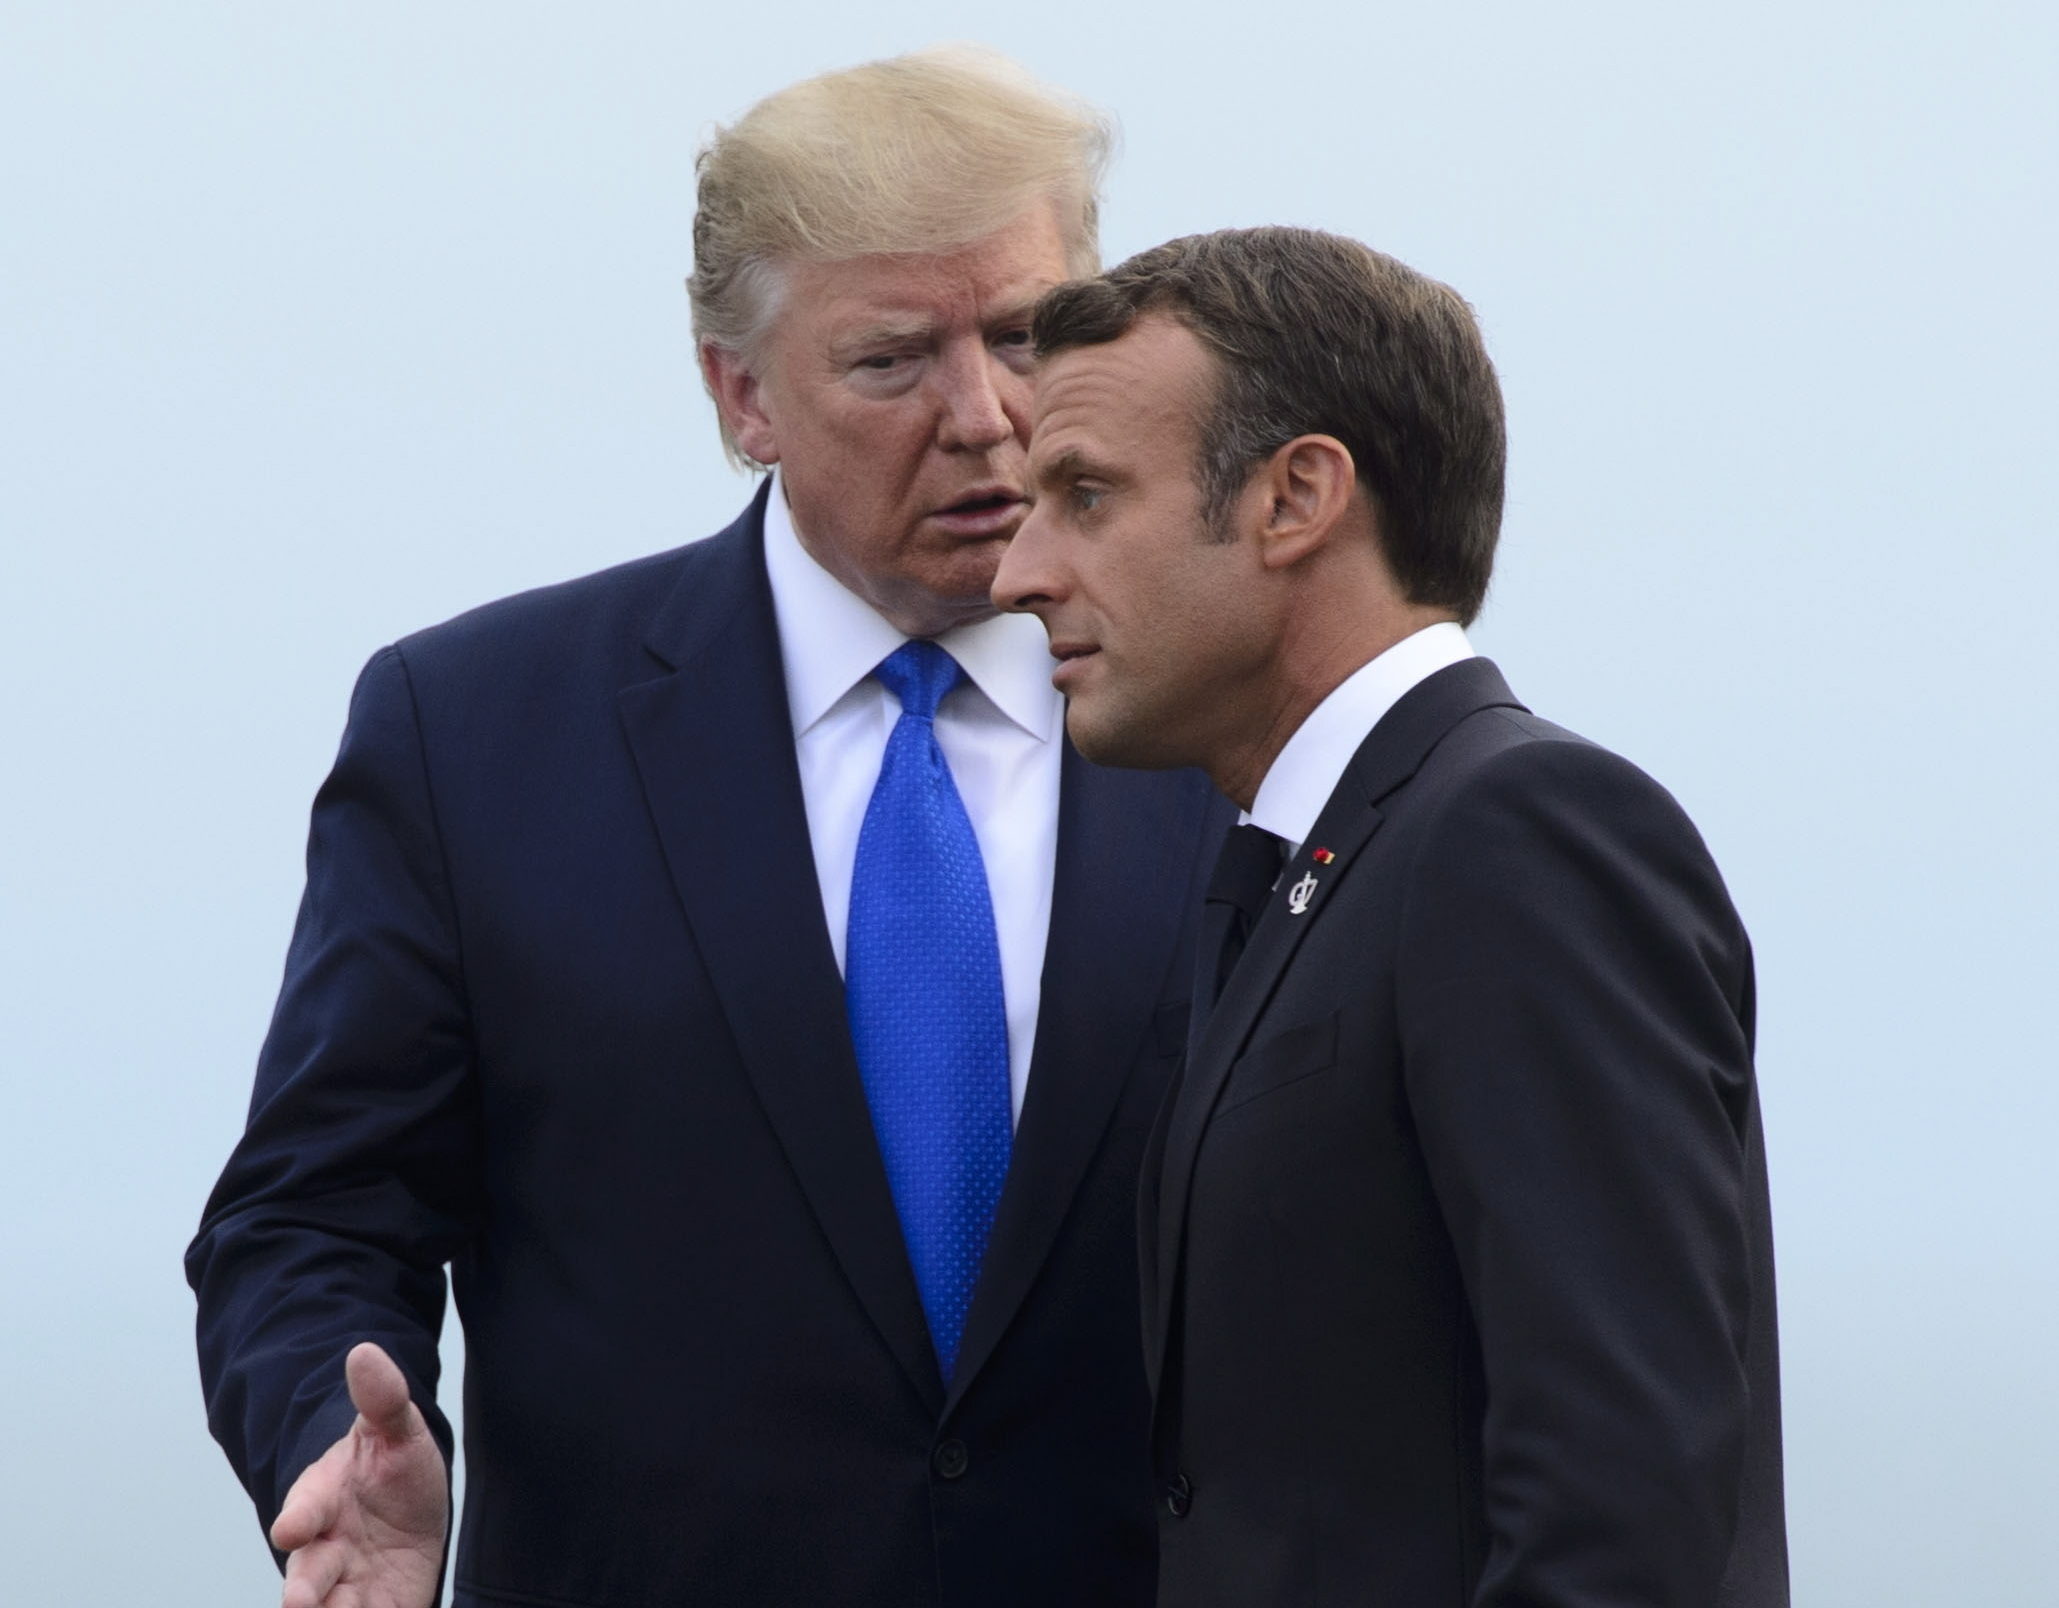 U.S. President Donald Trump, left, is greeted by the President of France Emmanuel Macron as he arrives to the G7 Summit in Biarritz, France, Saturday, Aug. 24, 2019. (Sean Kilpatrick/The Canadian Press via AP)